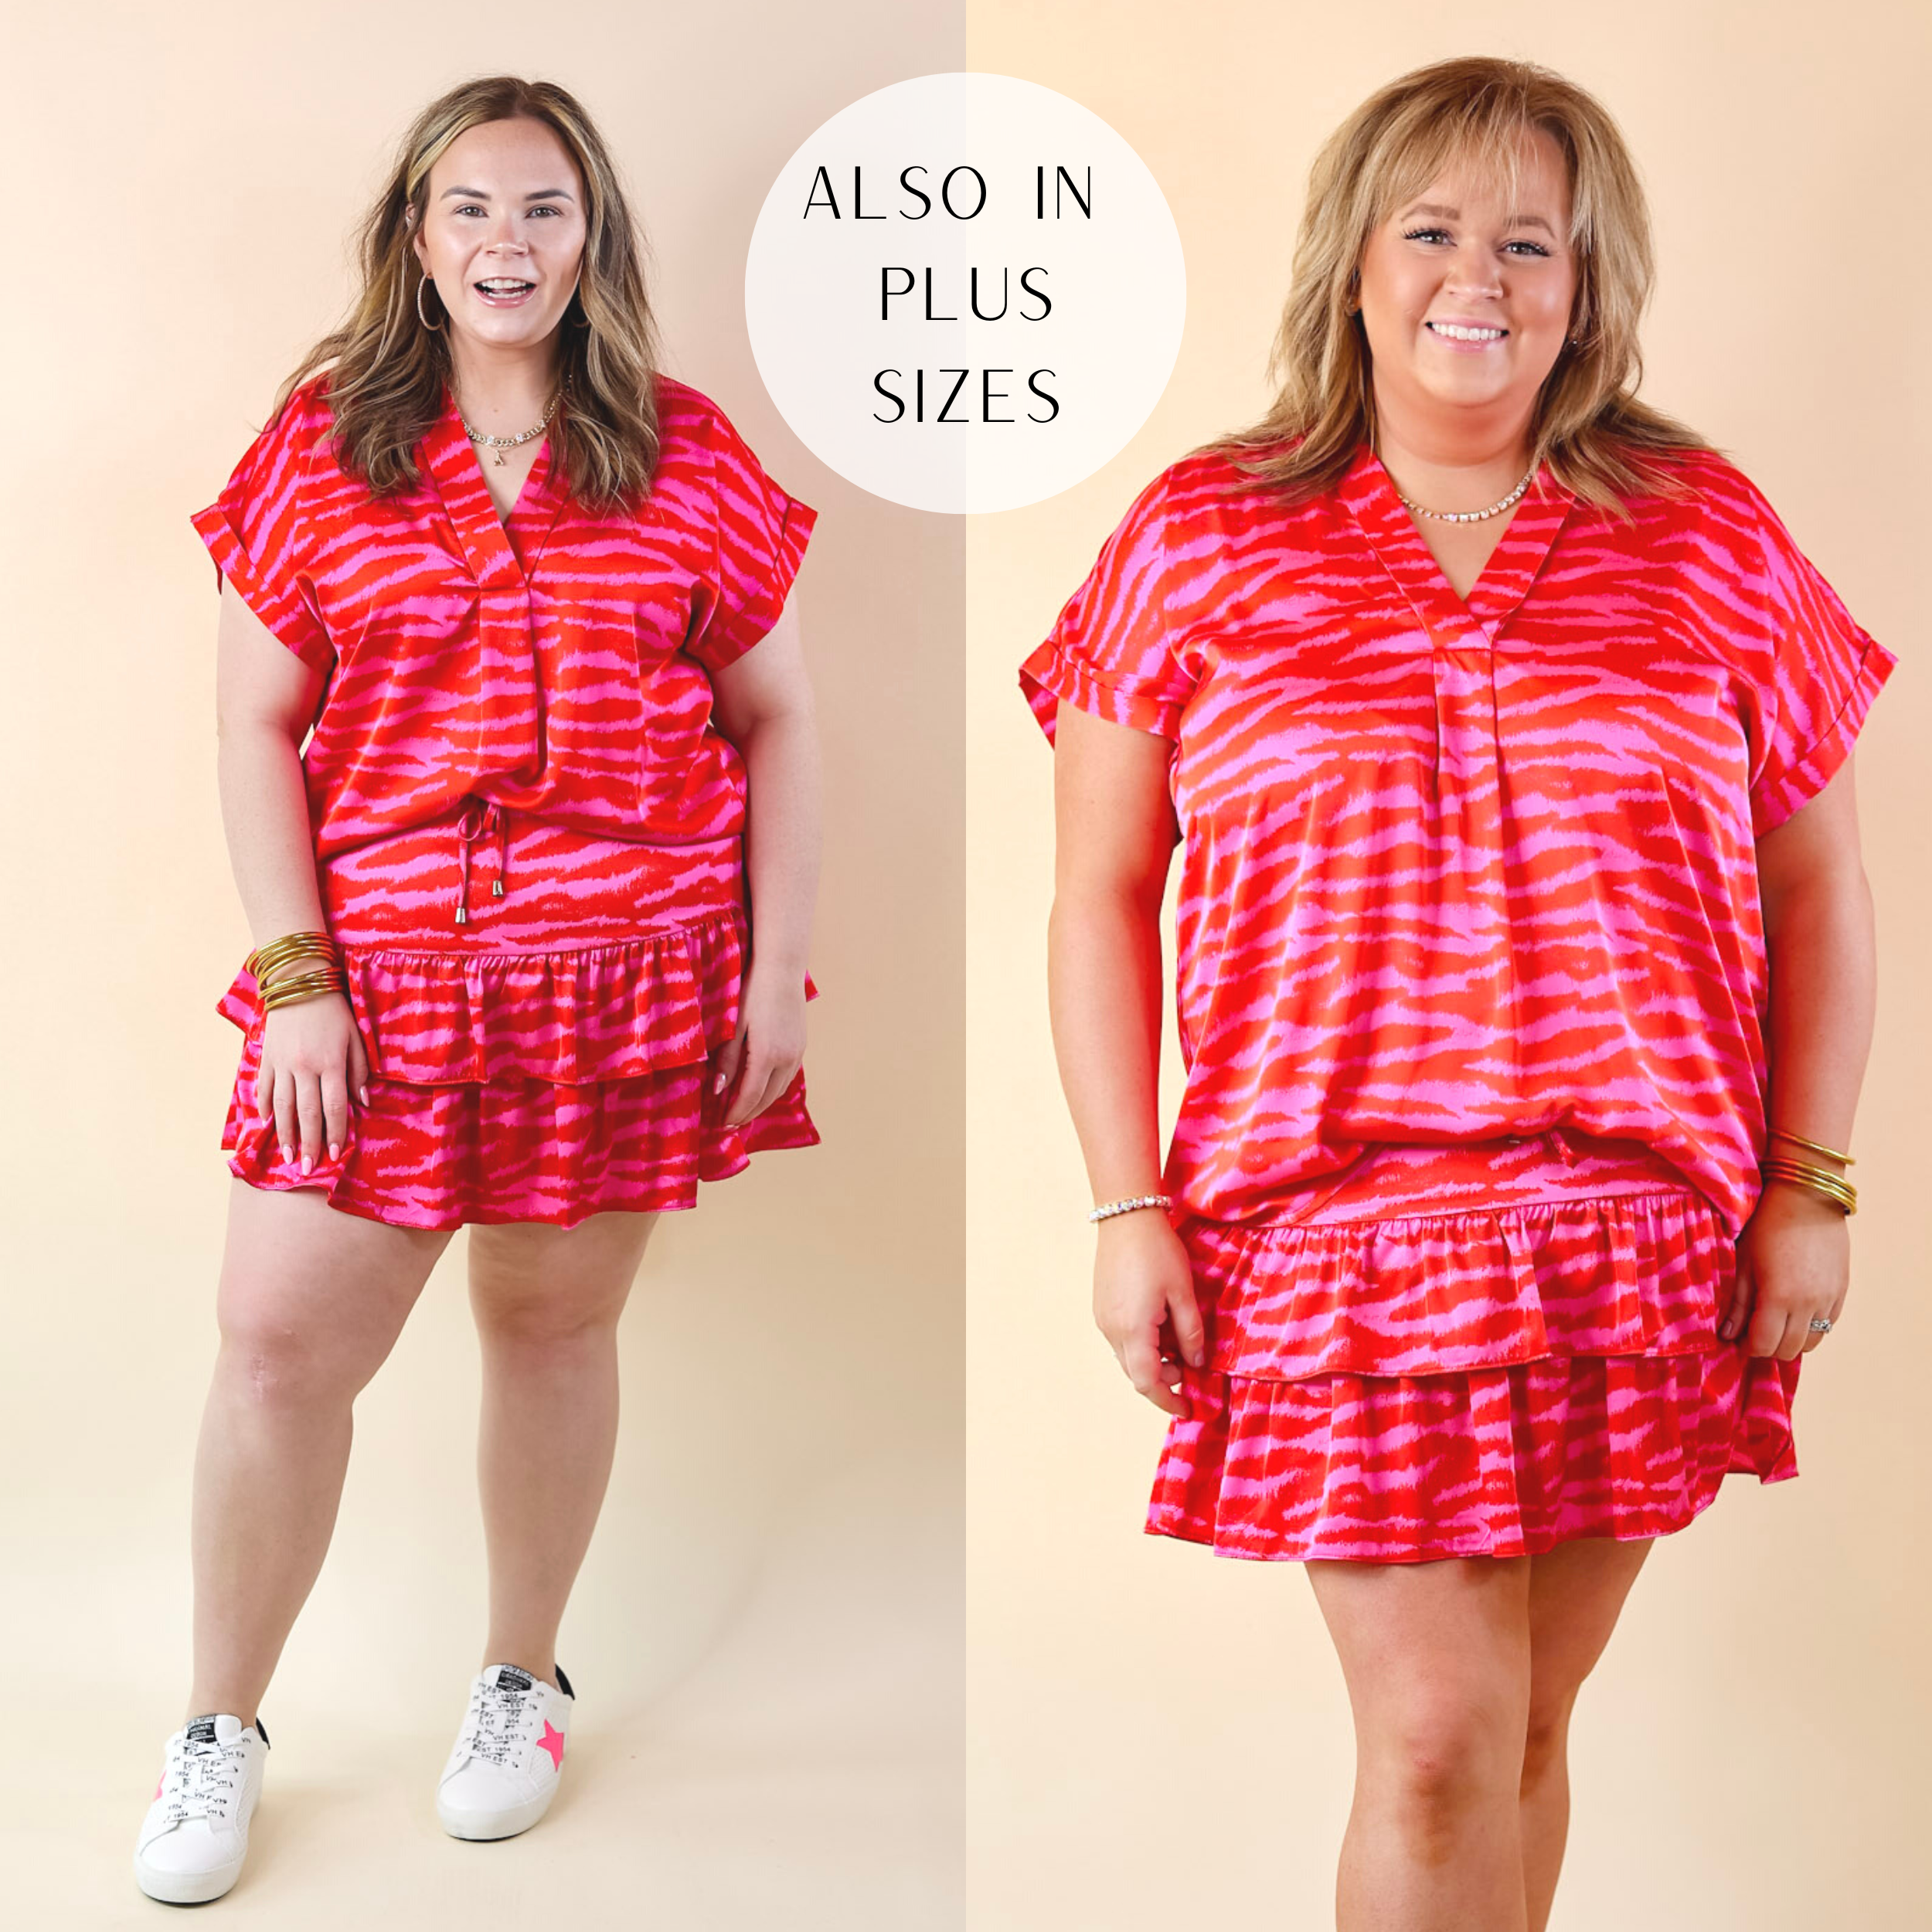 Vibrant Vibes Zebra Print V Neck Top with Short Sleeves in Red and Pink - Giddy Up Glamour Boutique